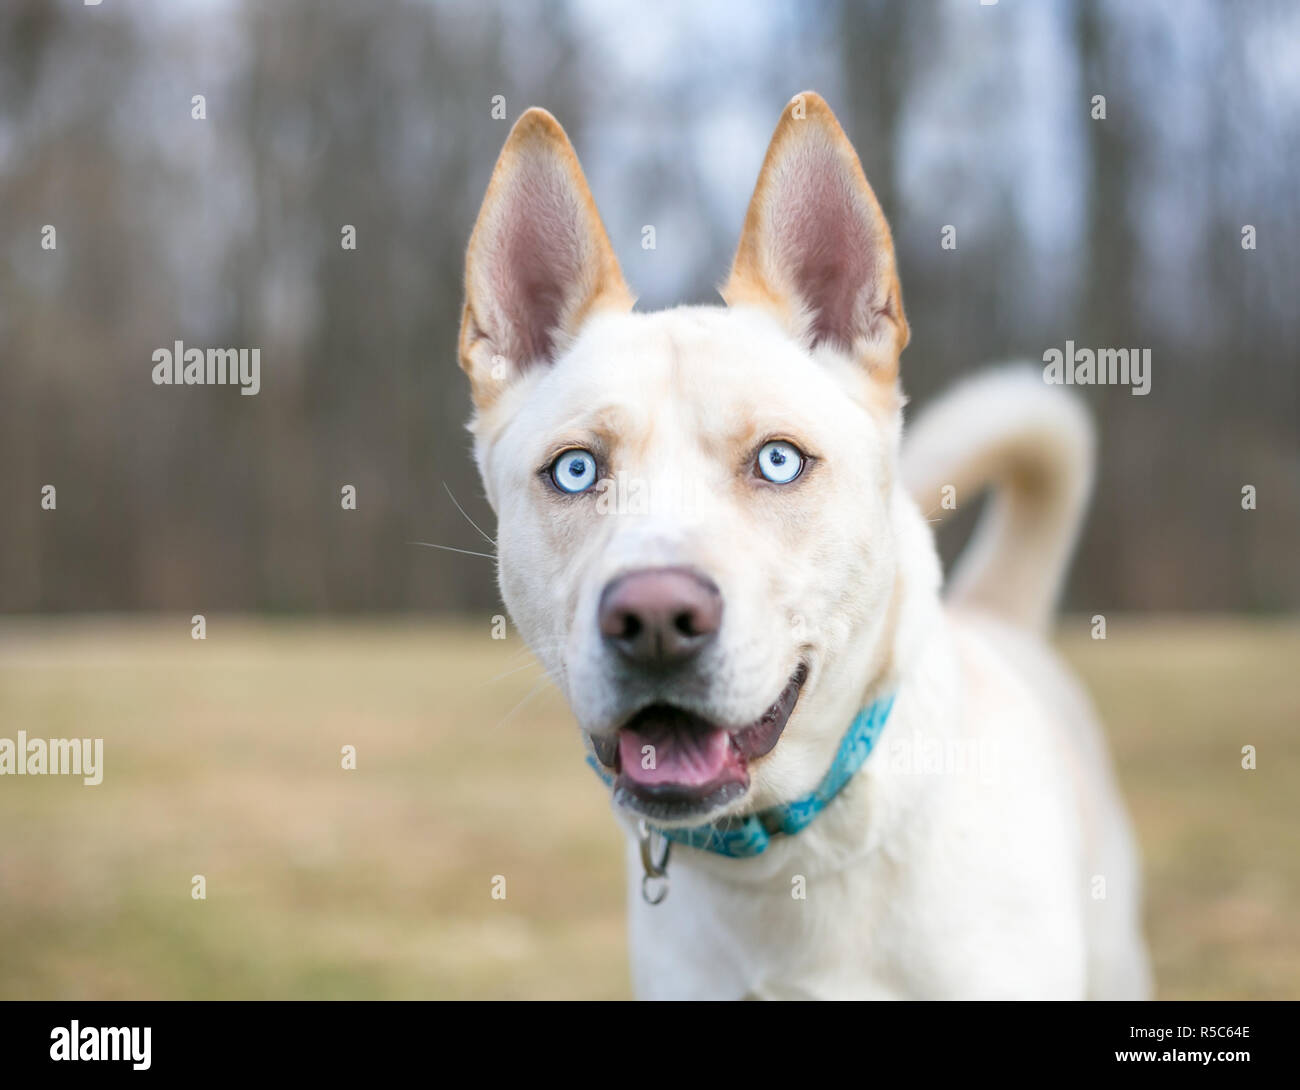 A cream colored Siberian Husky dog with blue eyes and a happy expression Stock Photo